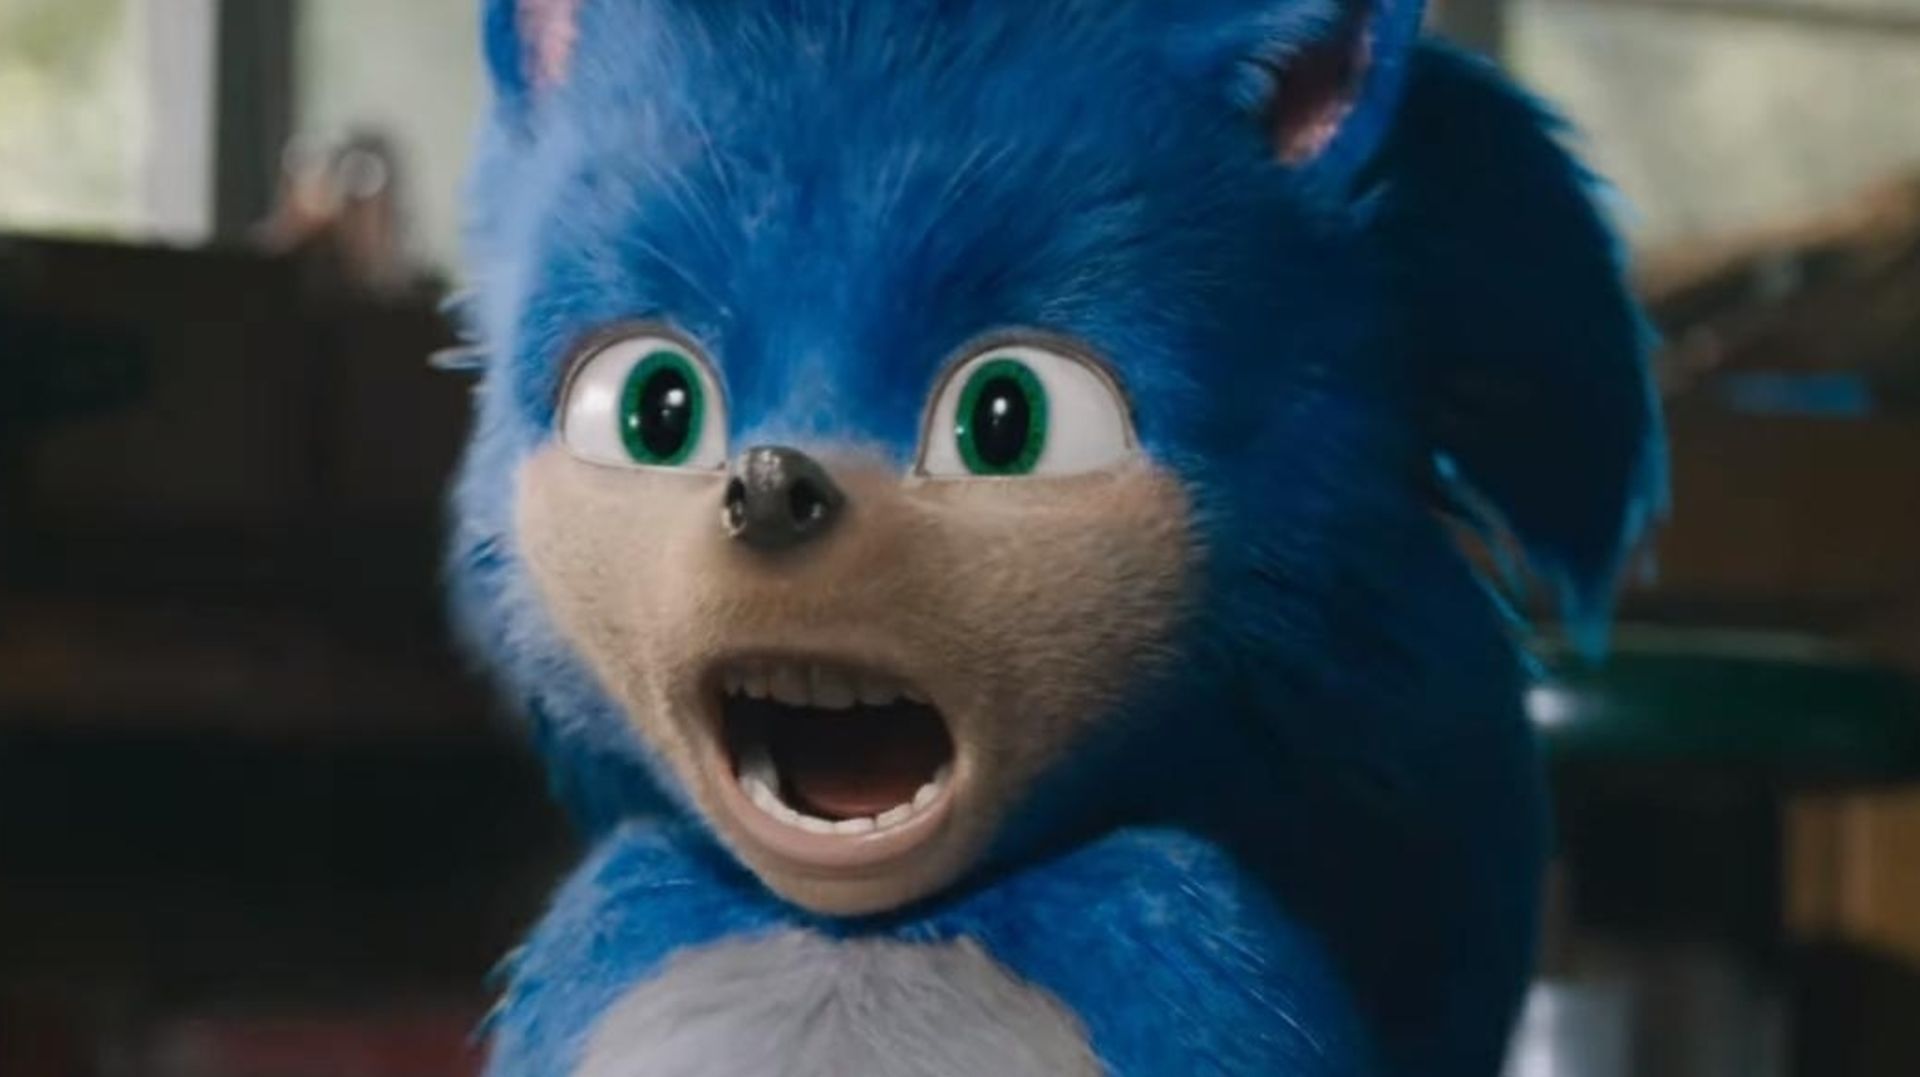 Sonic the Hedgehog's movie appearance will change following fan backlash | AiPT!